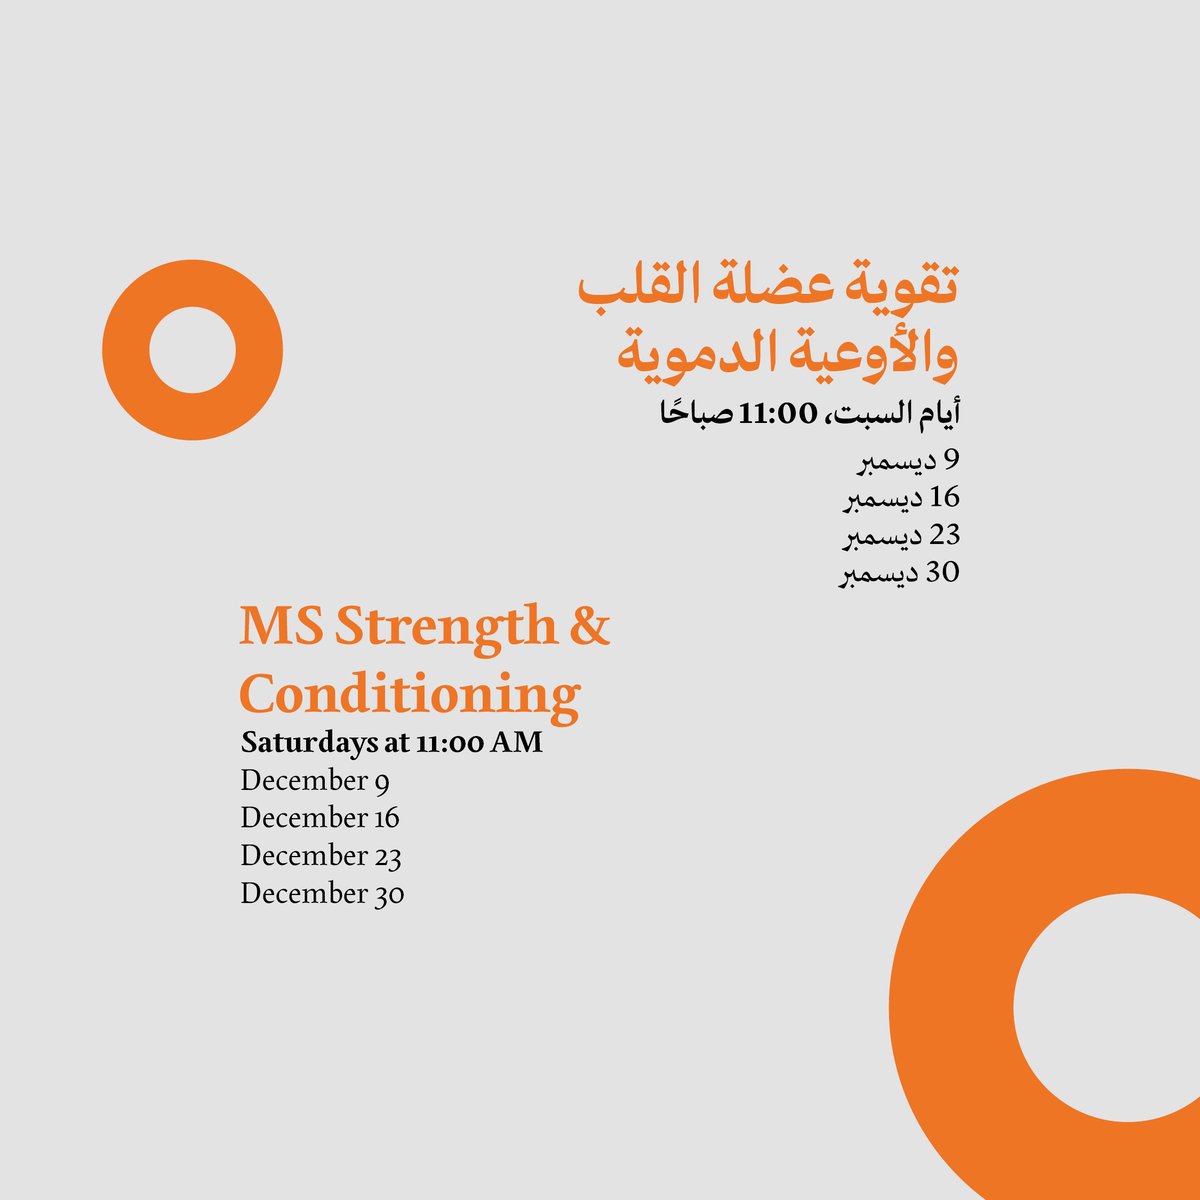 Get ready to feel #MSStrong in Dubai!

Join us this December for an invigorating workout experience with Crossfit Circle, Dubai. These complimentary classes cater to all fitness levels, welcoming individuals with MS, along with friends and family.